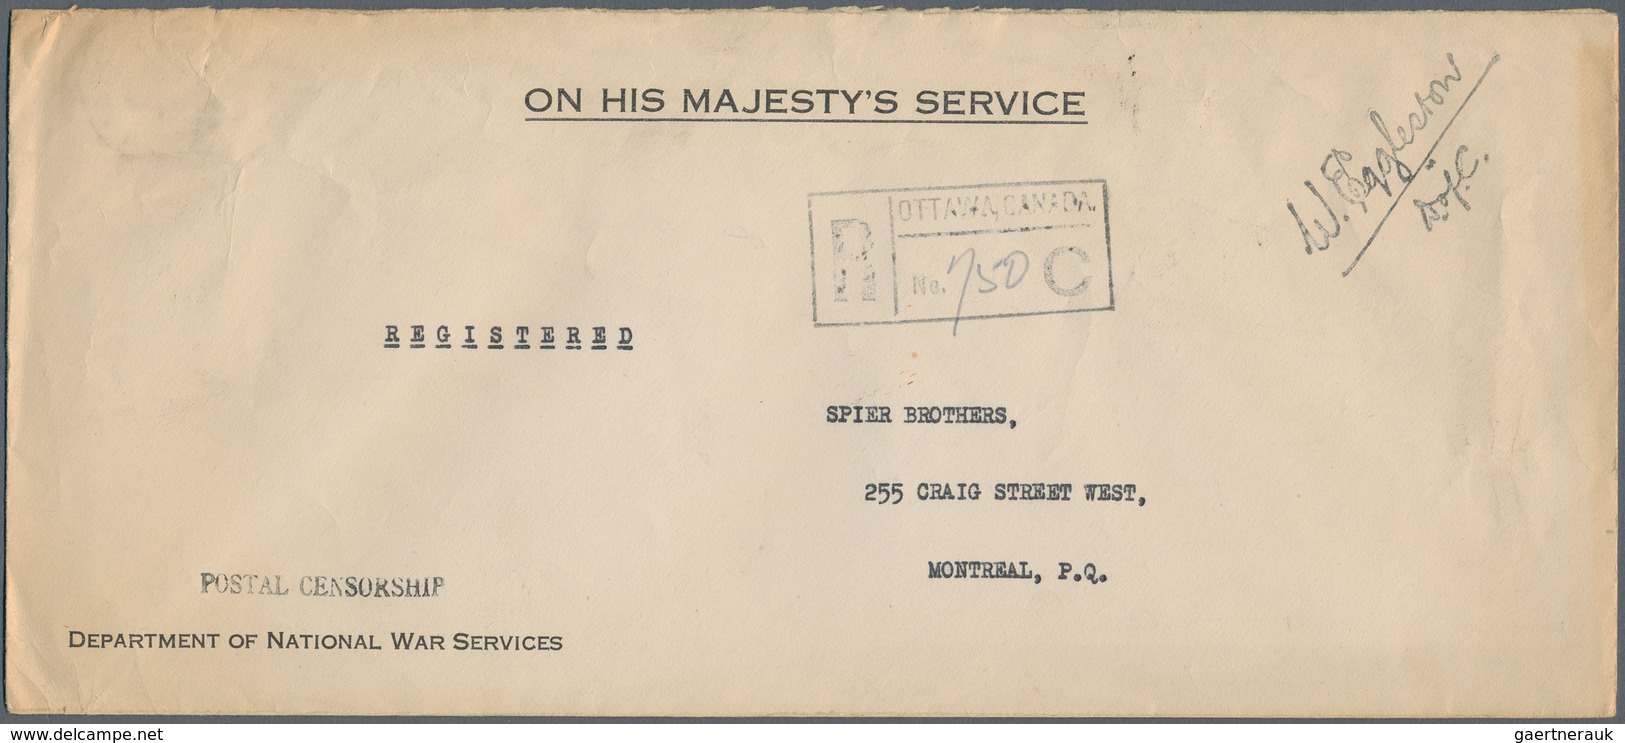 Kanada: 1941/45 ca. 290 letters, cards and covers, fieldpost incl. Canadian forces abroad, service l